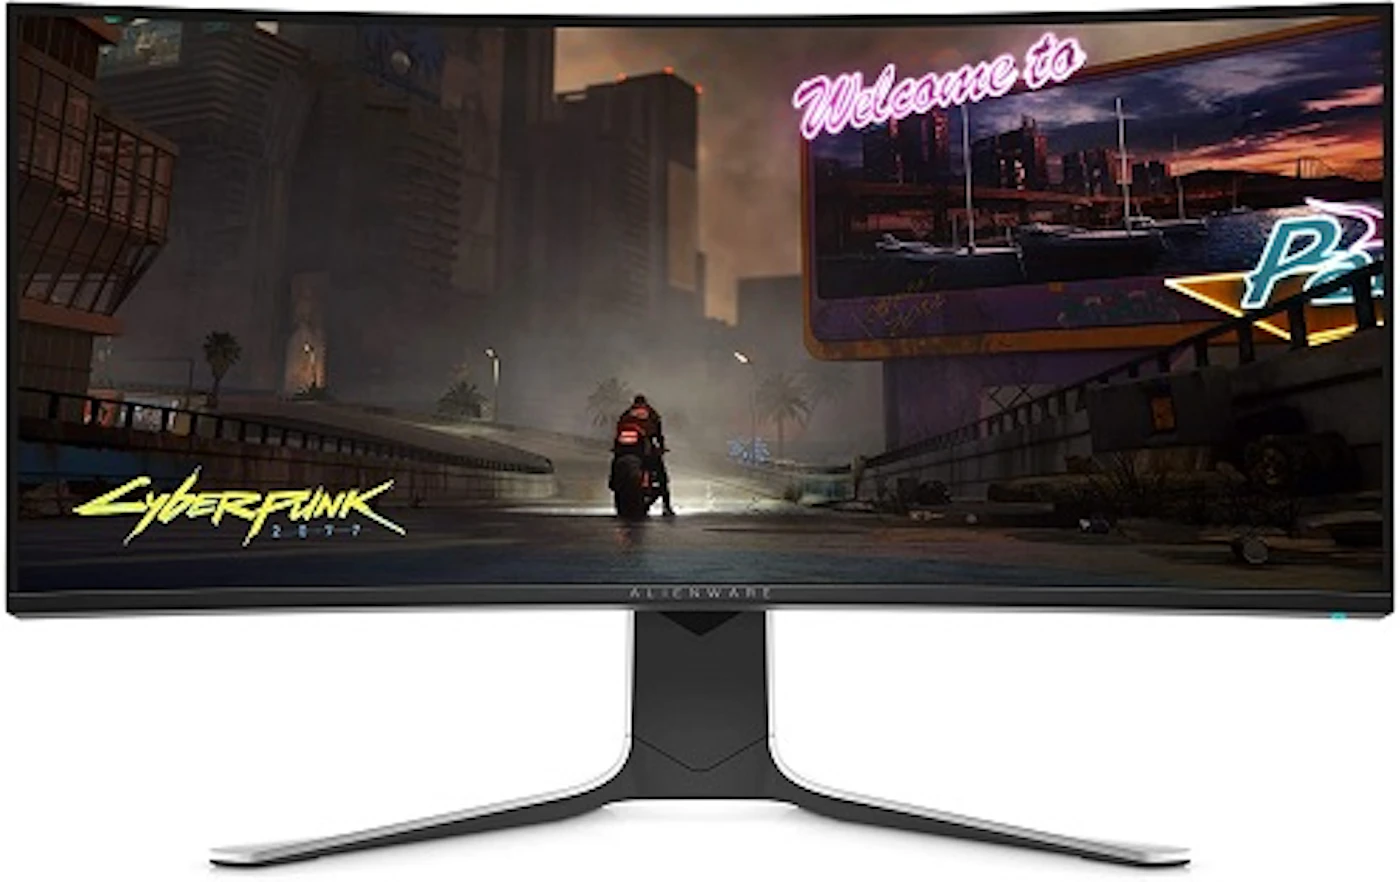 Alienware 34 3440 x 1440 UltraWide Curved Gaming Monitor AW3420DW